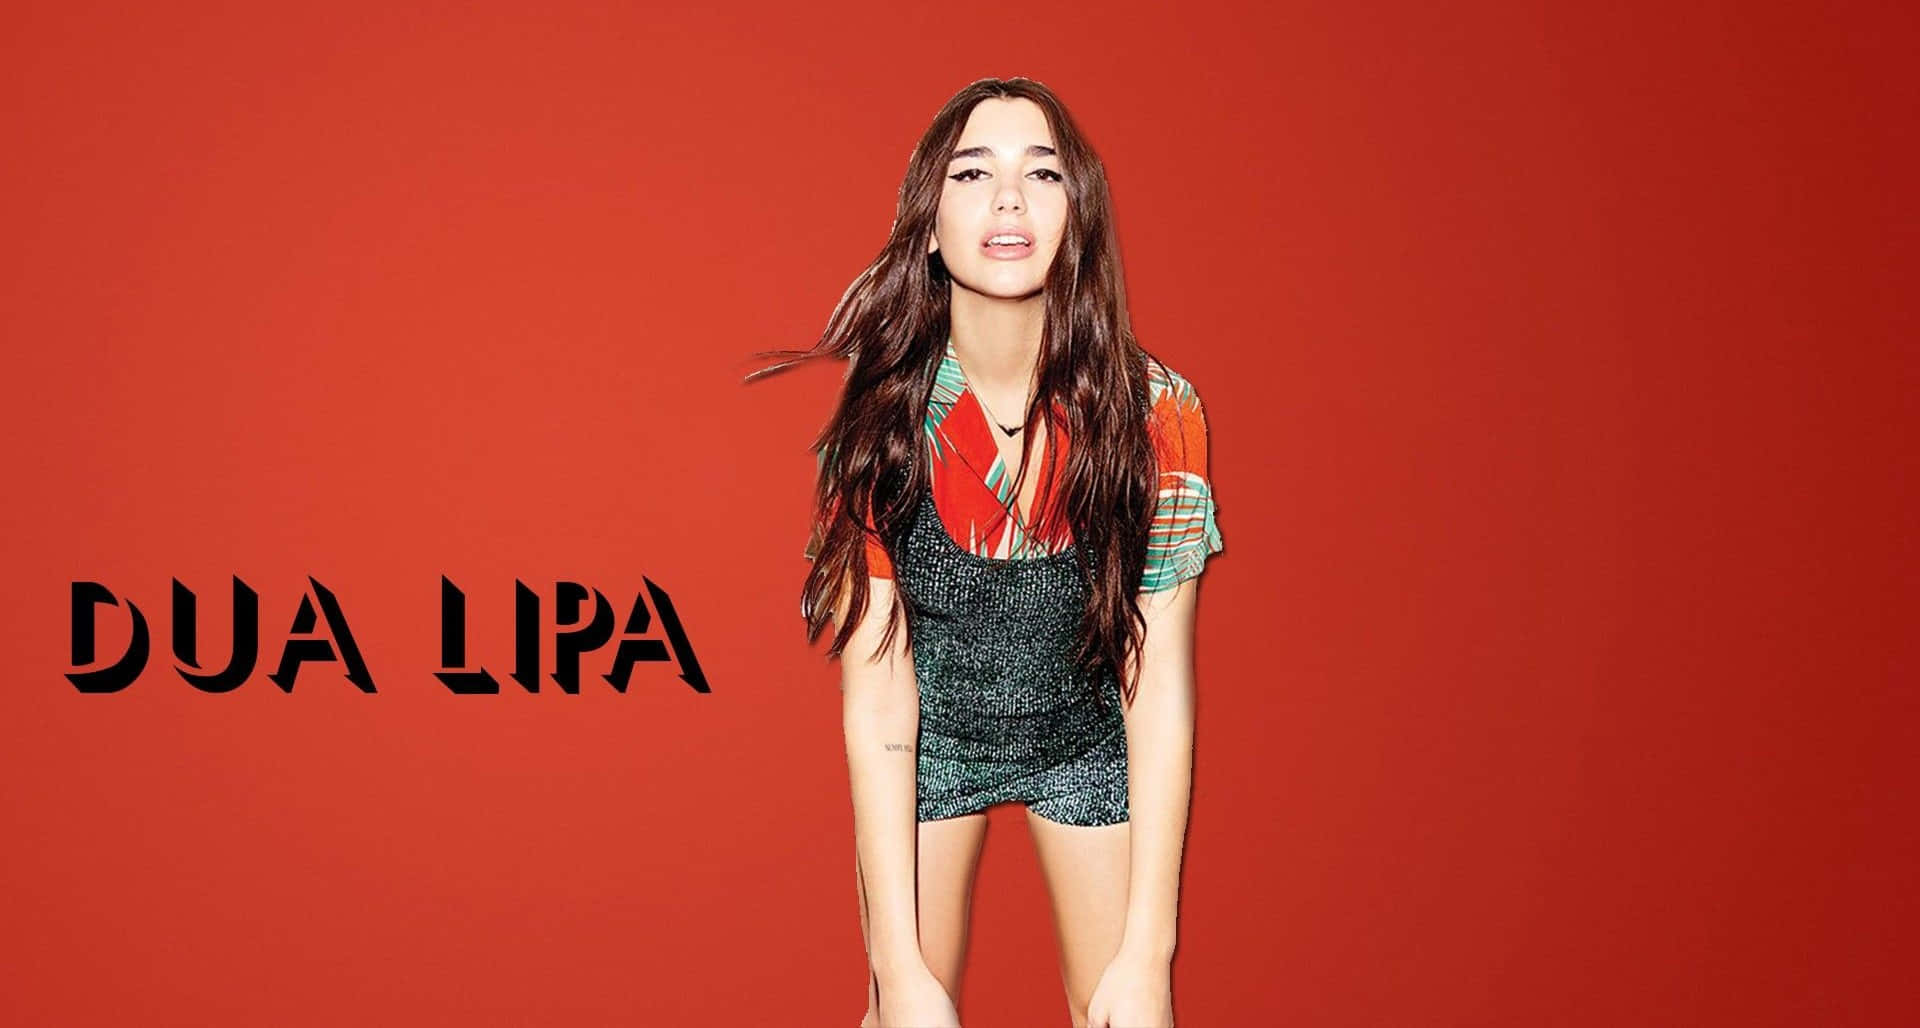 Caption: Dua Lipa striking a pose on stage in concert